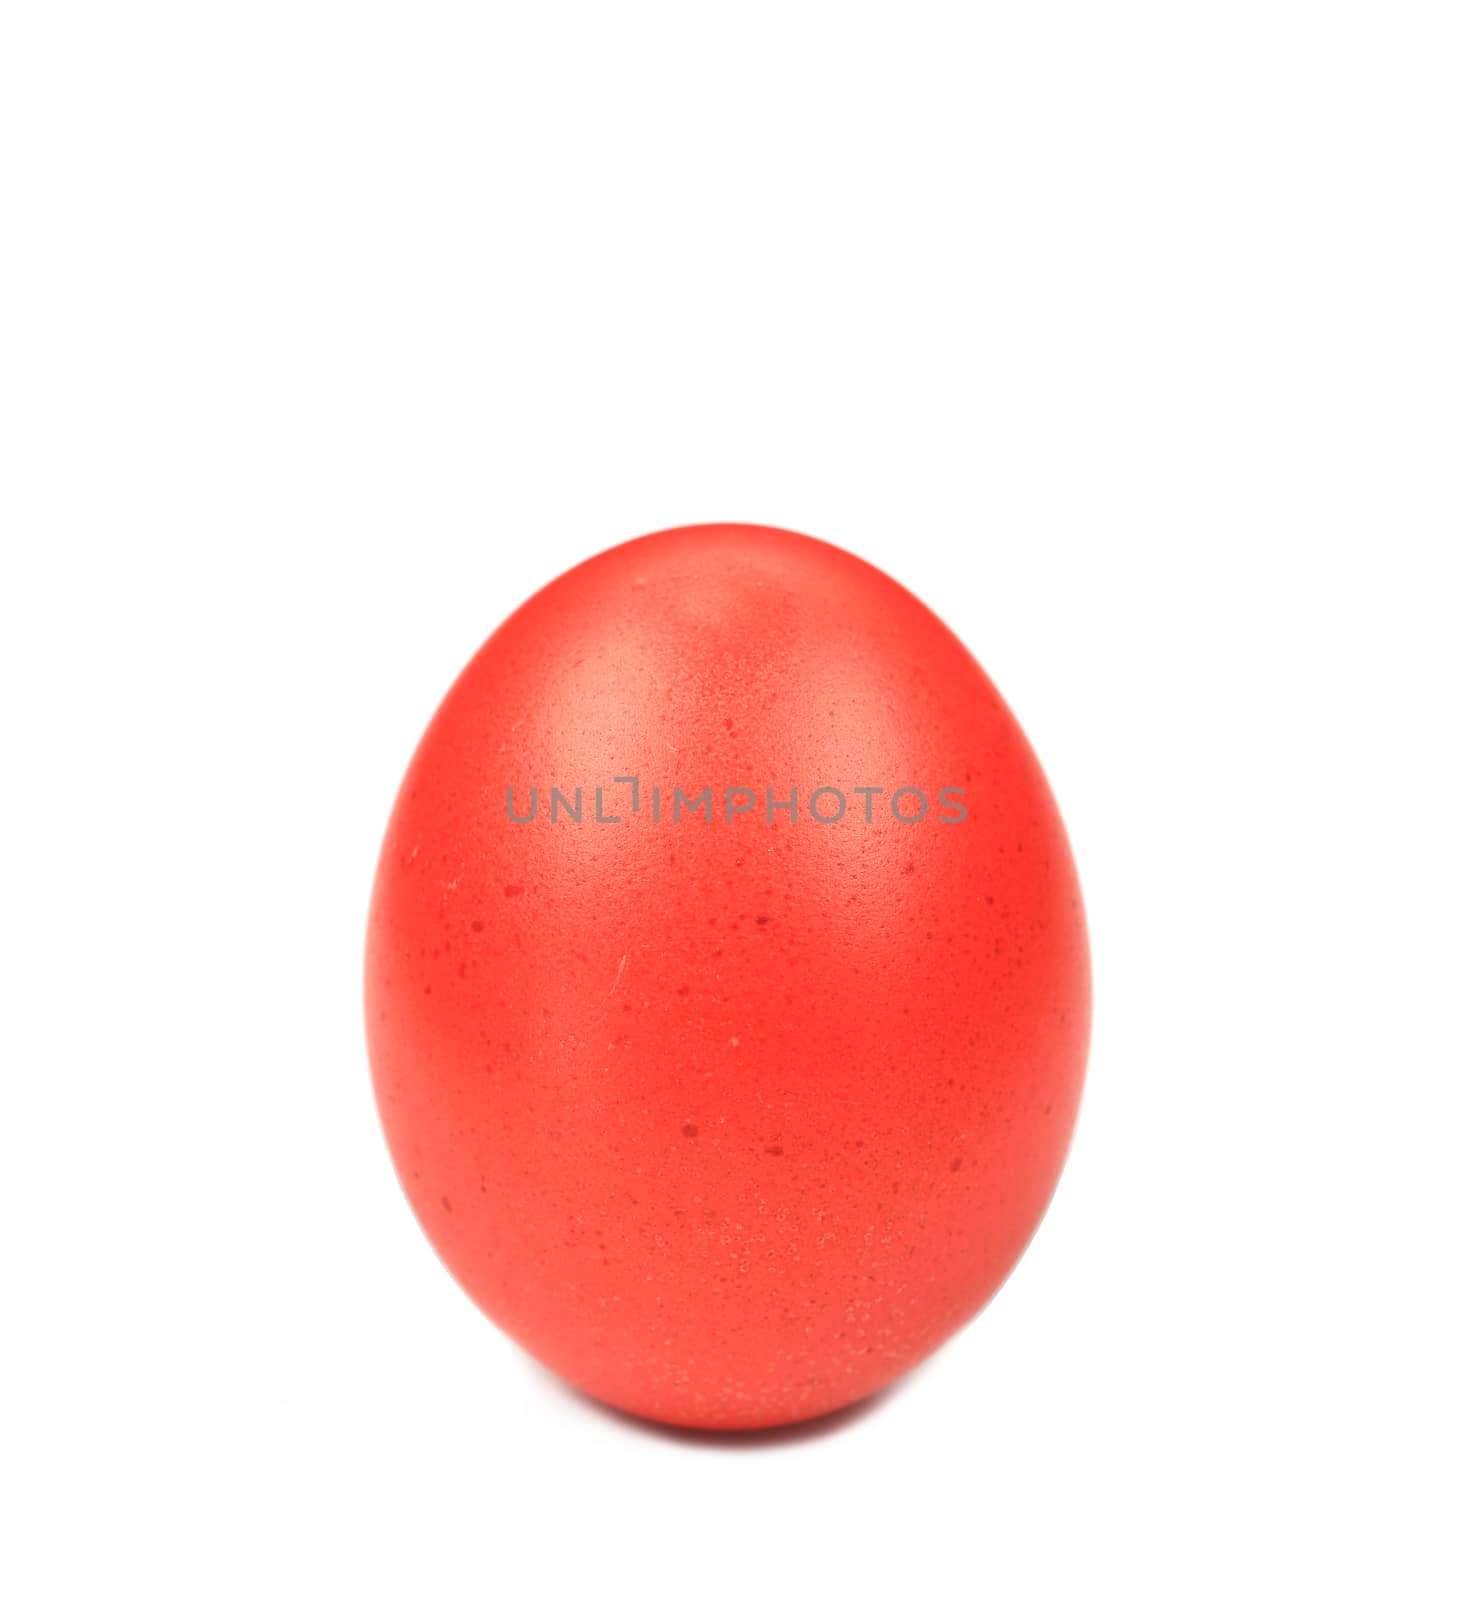 Red easter egg. Isolated on a white background.